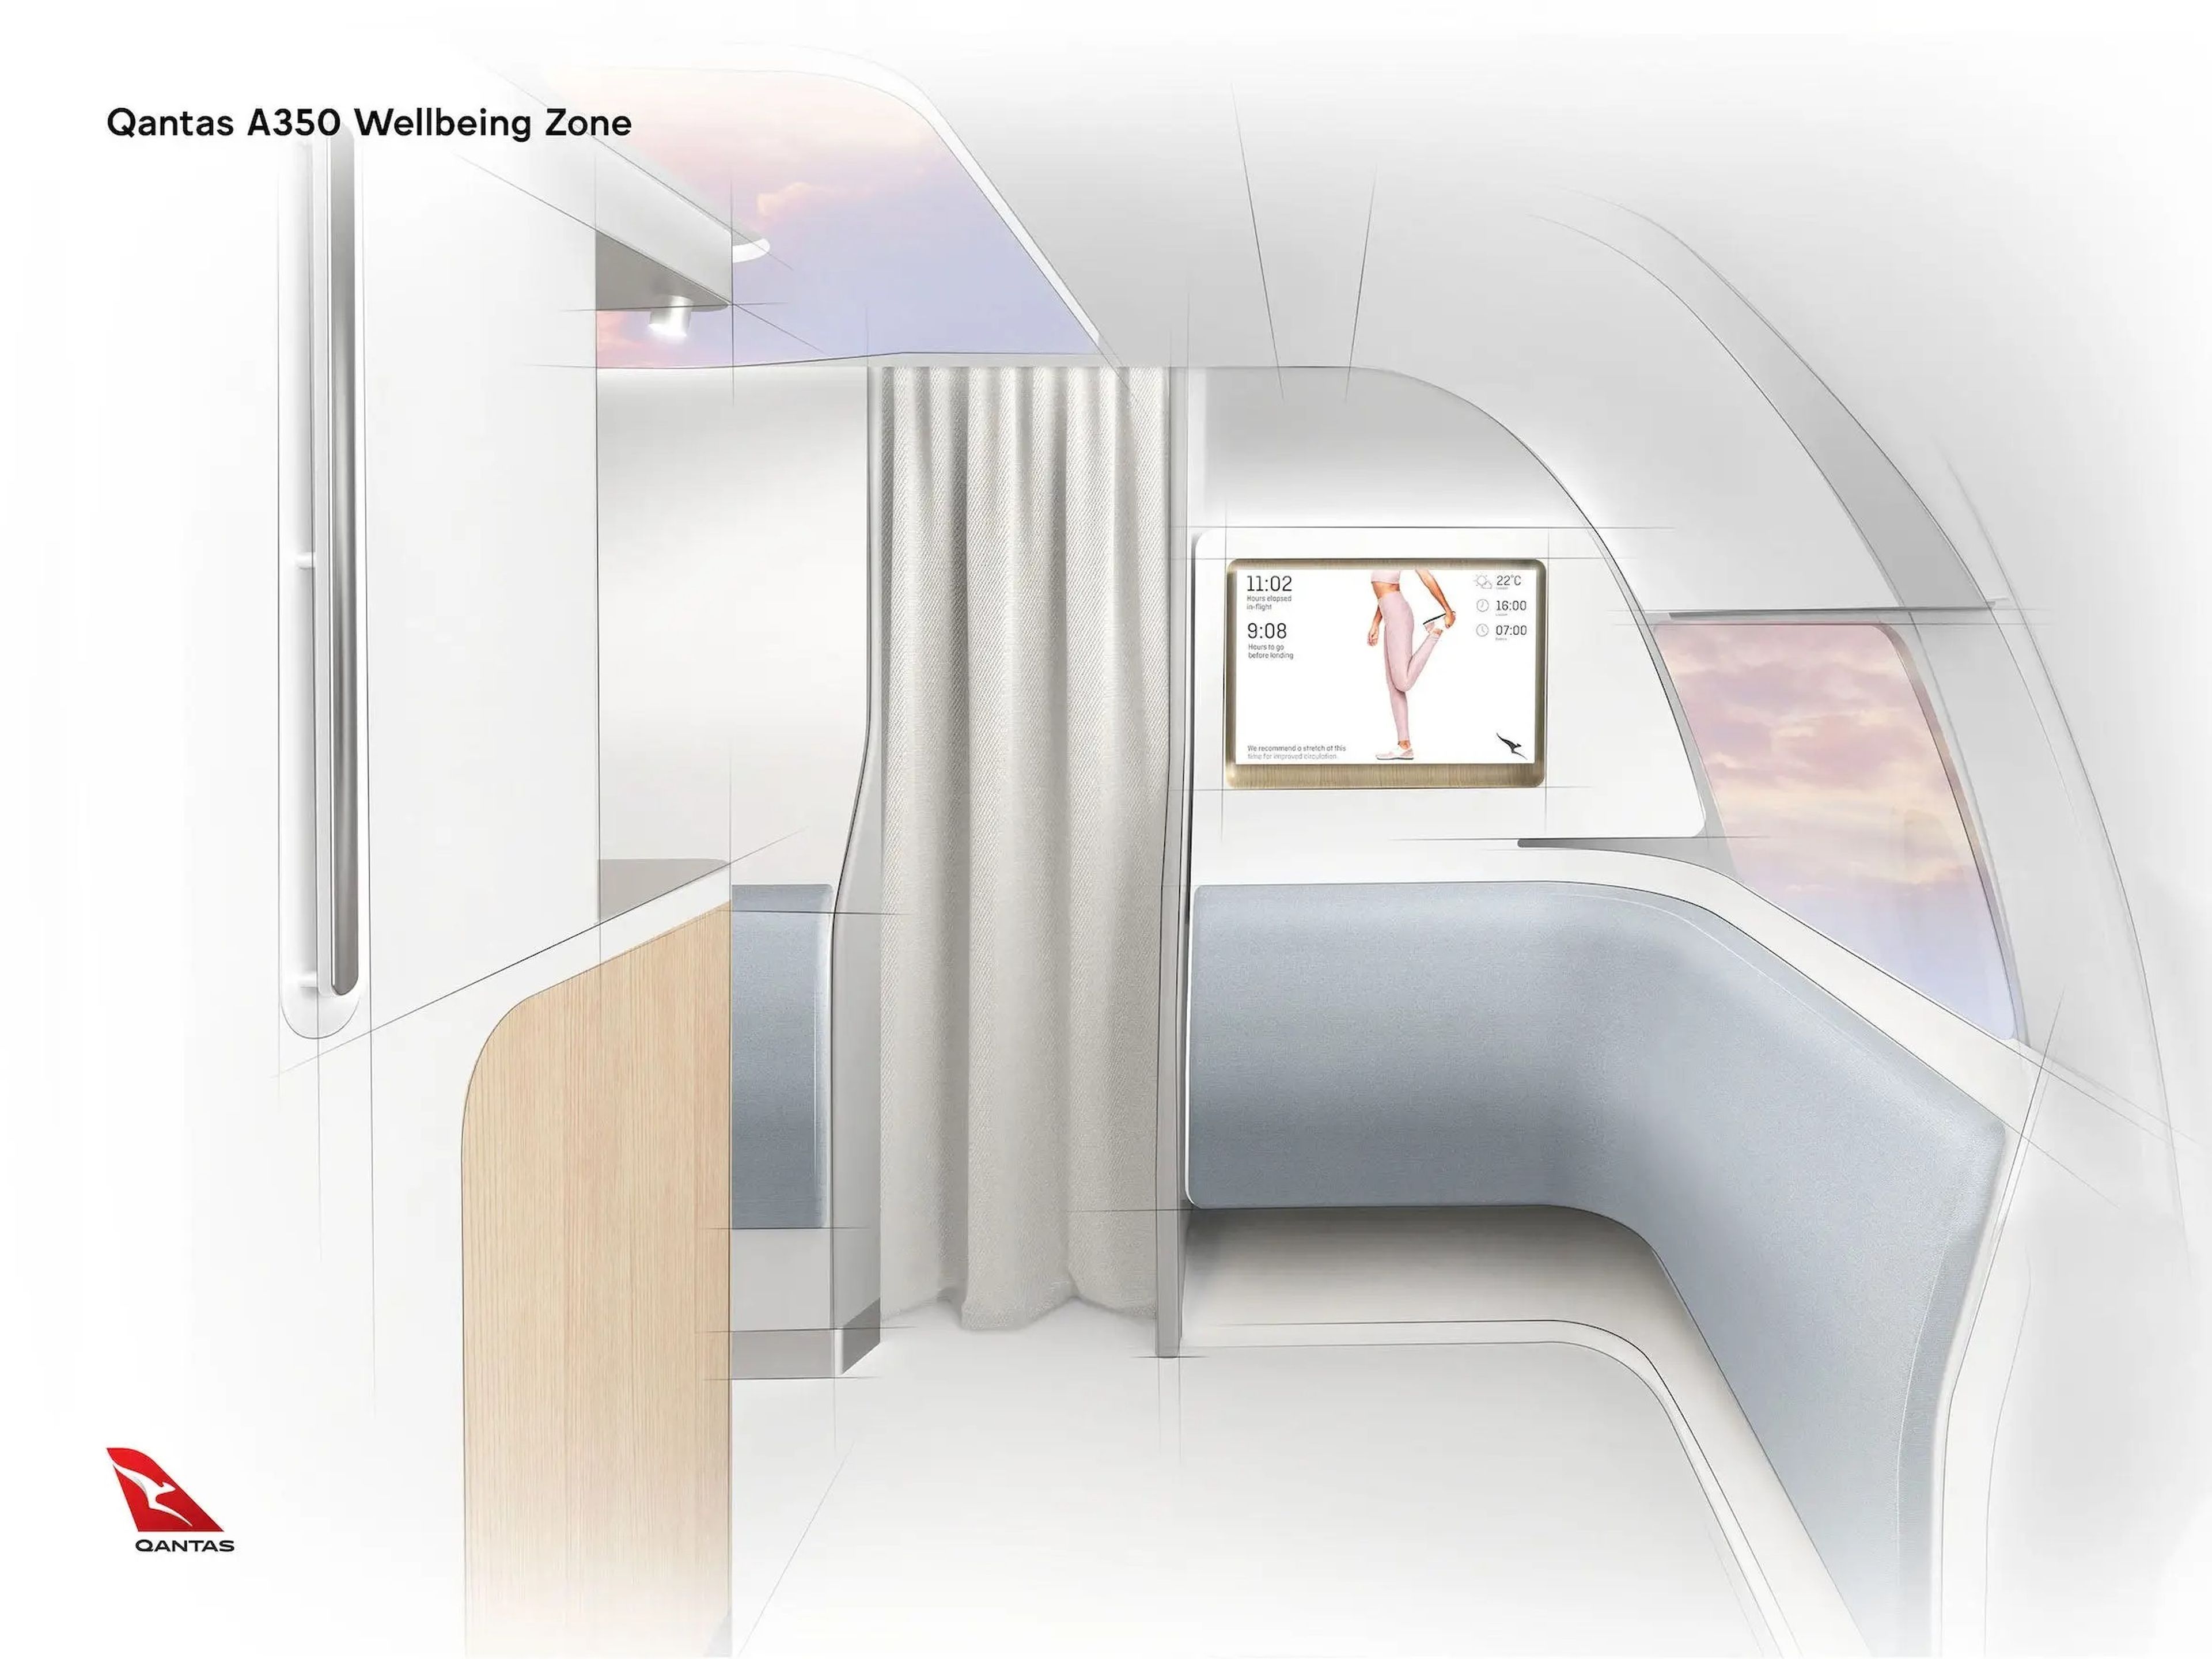 The wellbeing zone in the Qantas A350 with windows, a screen displaying someone stretching and some stats..